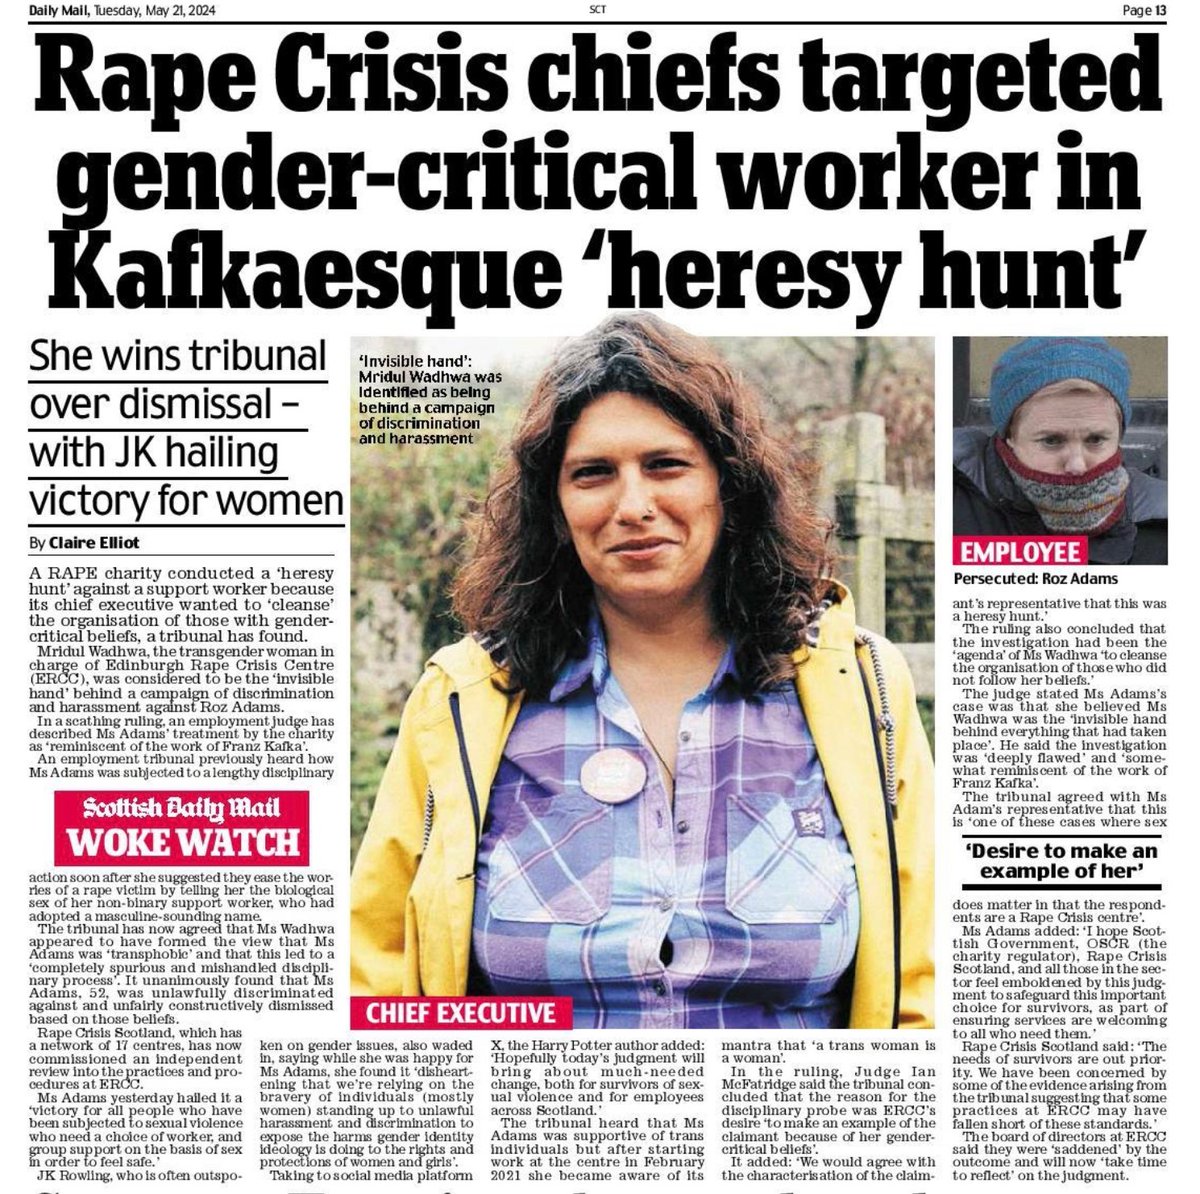 Rape Crisis Scotland said, “The needs of survivors are our priority”. Yet at Edinburgh Rape Crisis, they were secondary to the ‘needs’ of some workers and service users. True colours …